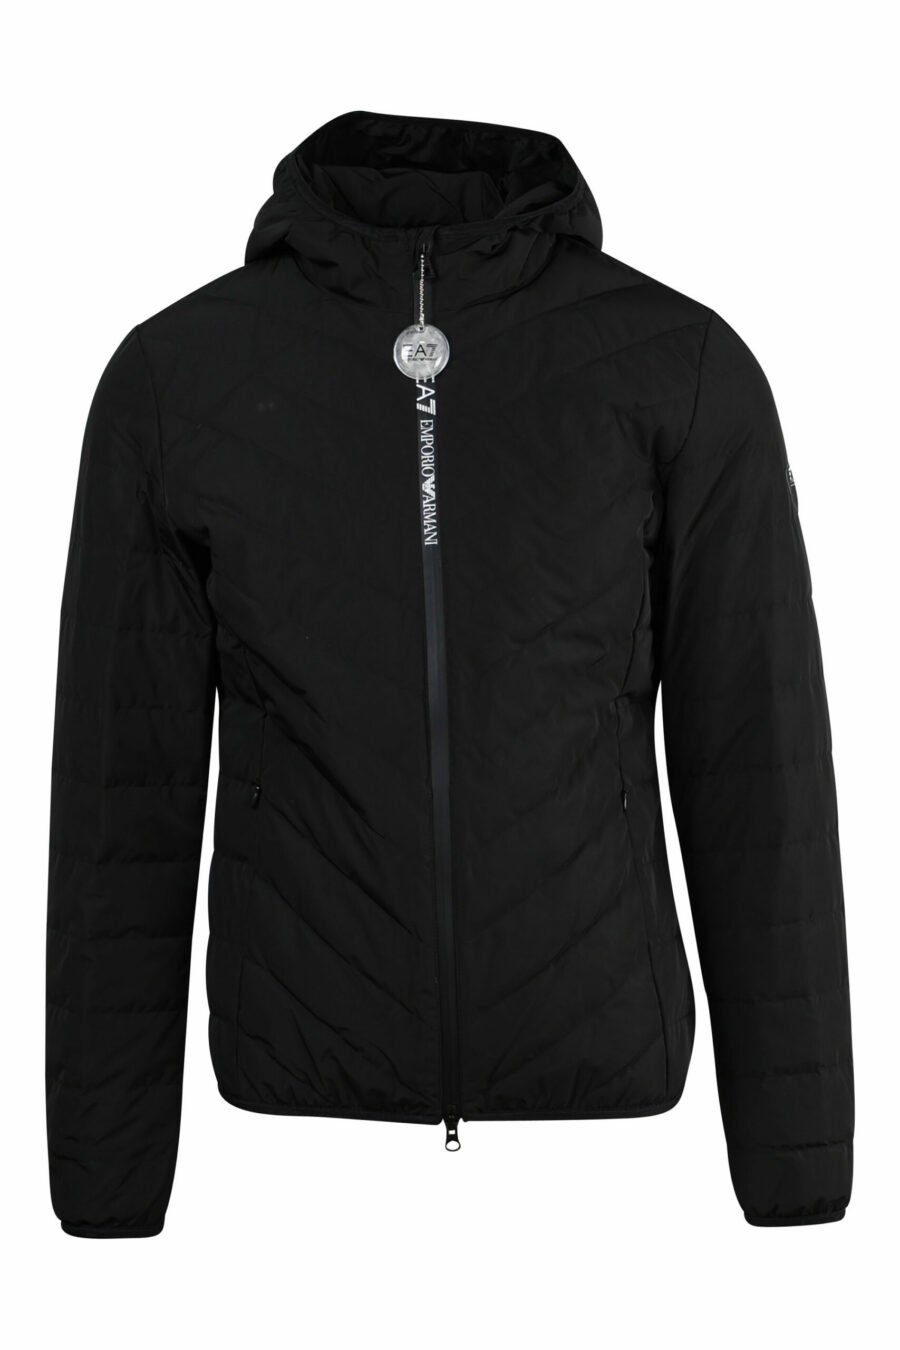 Black windbreaker jacket with hood and vertical "lux identity" logo - 8057767519568 scaled